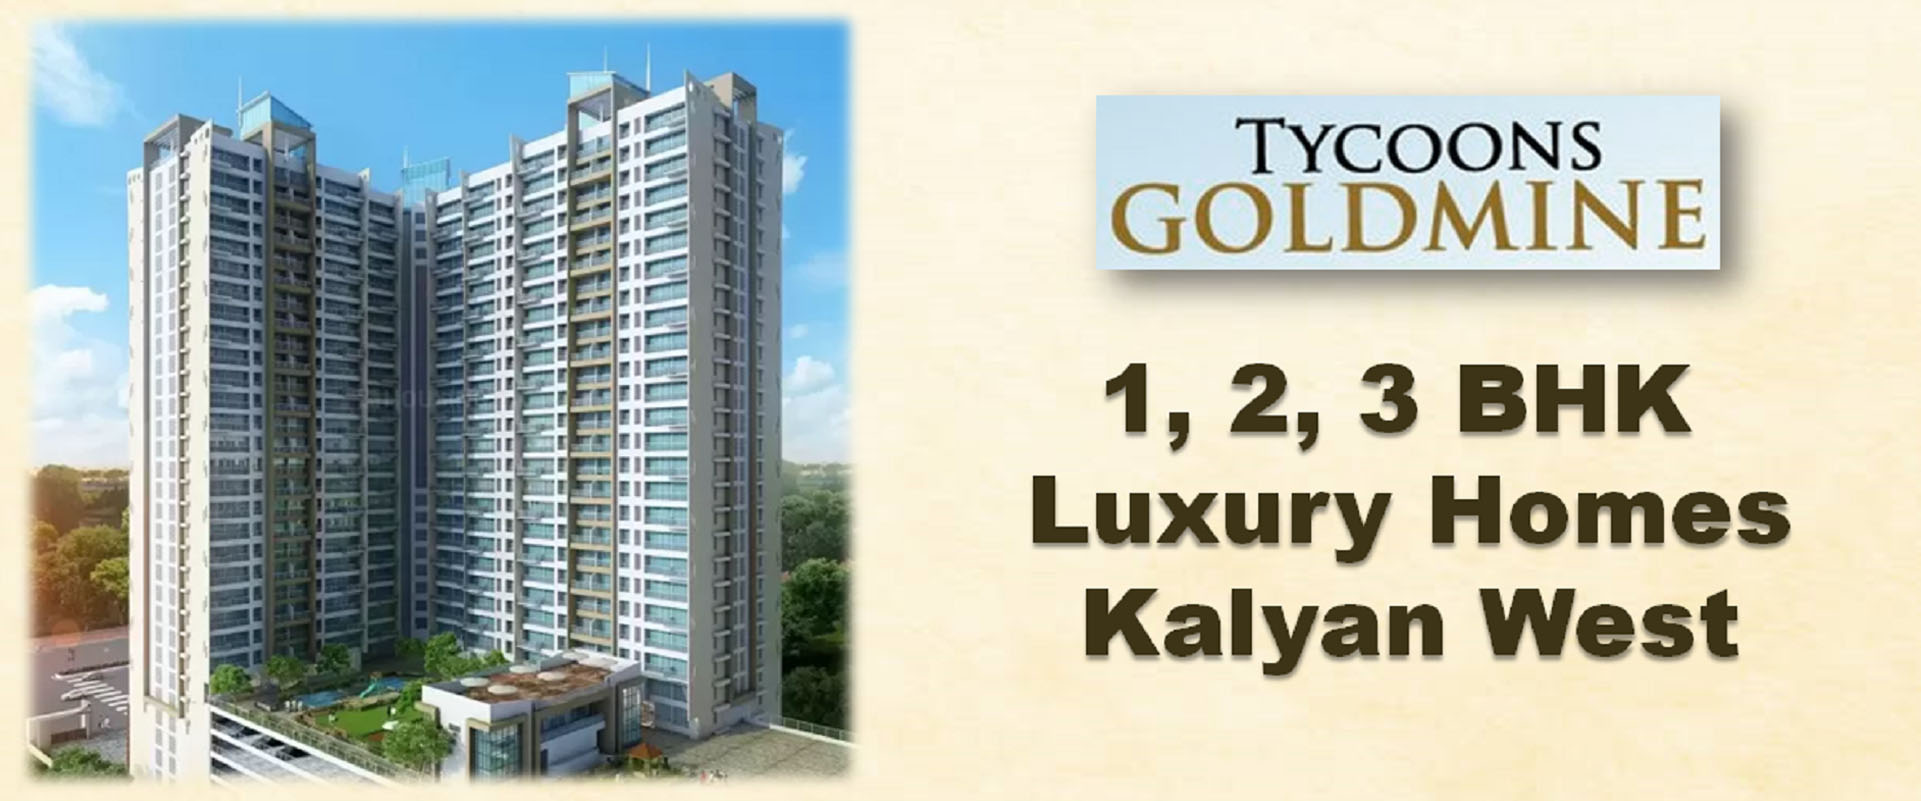 8 Tycoons Goldmine New launch in Kalyan ideas